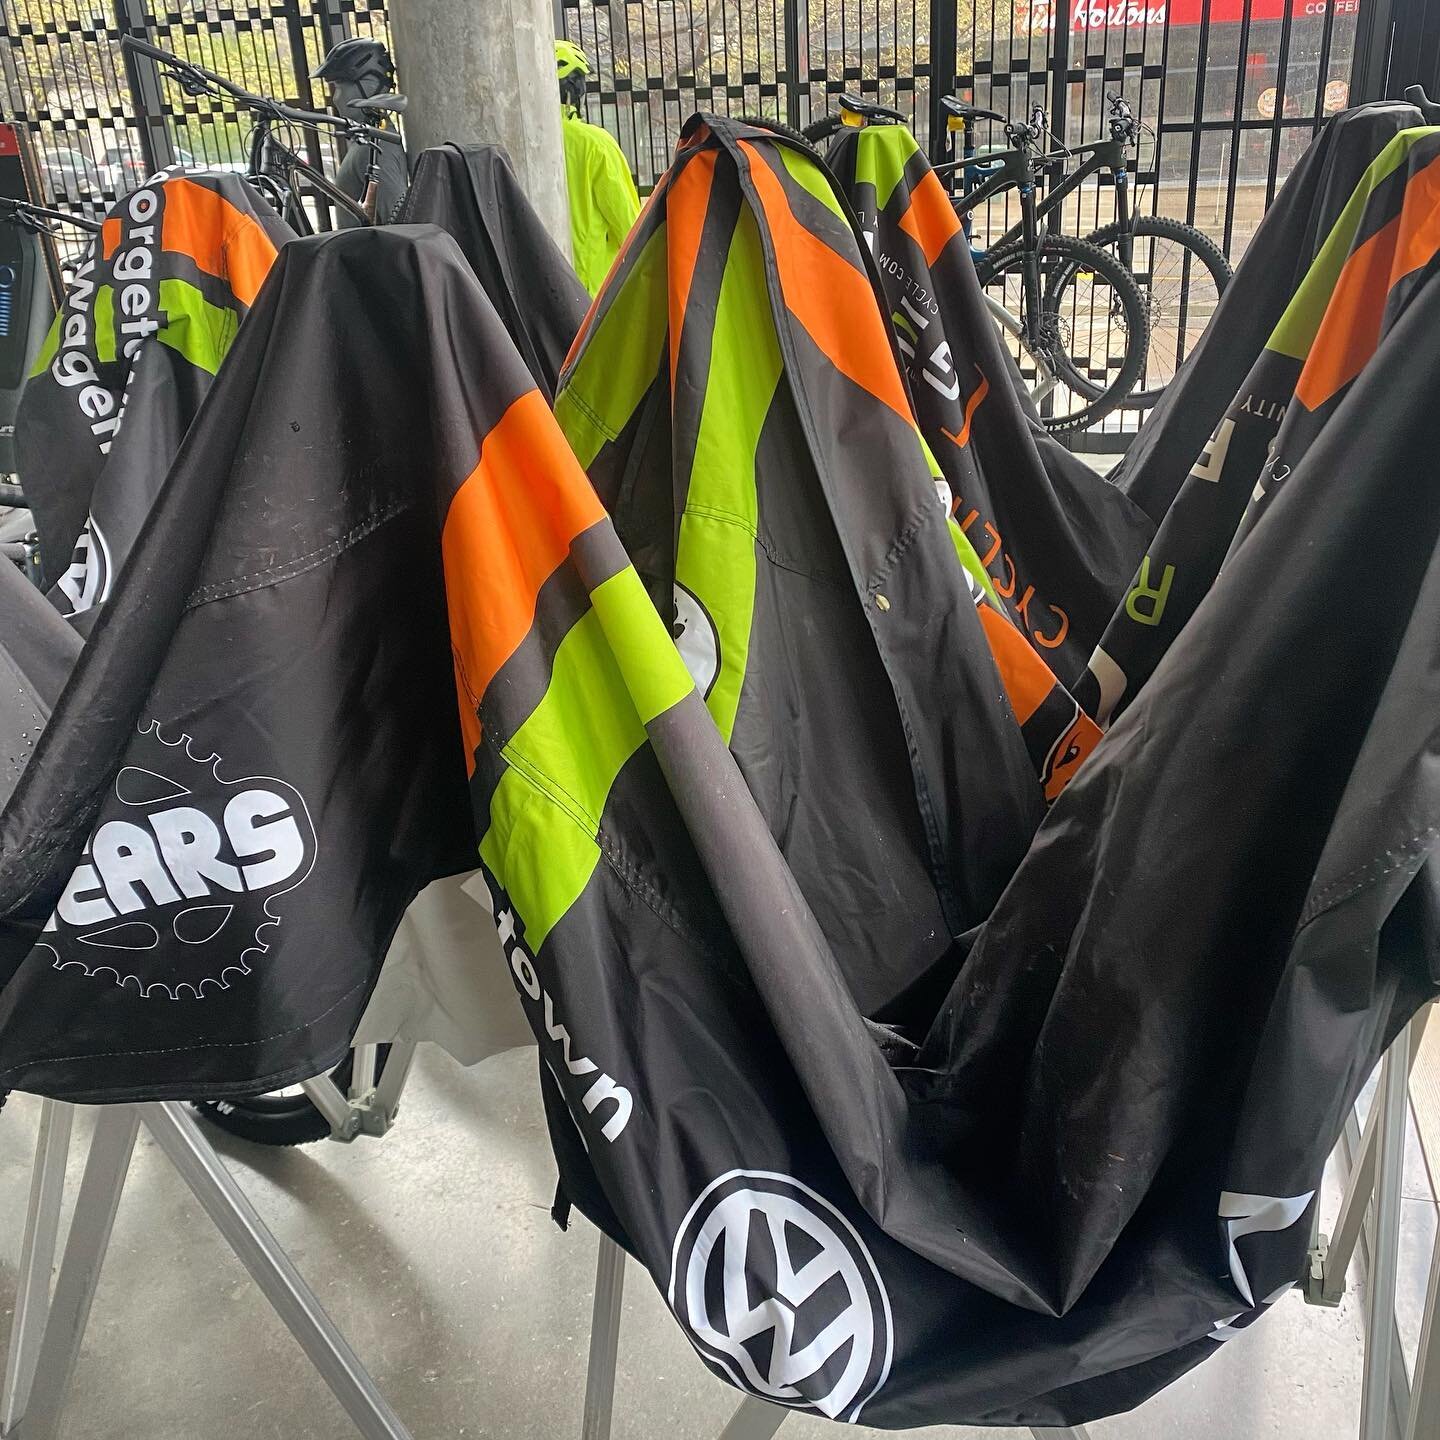 Club tents are back at the shop and being dried out after some heavy use at the P2A.